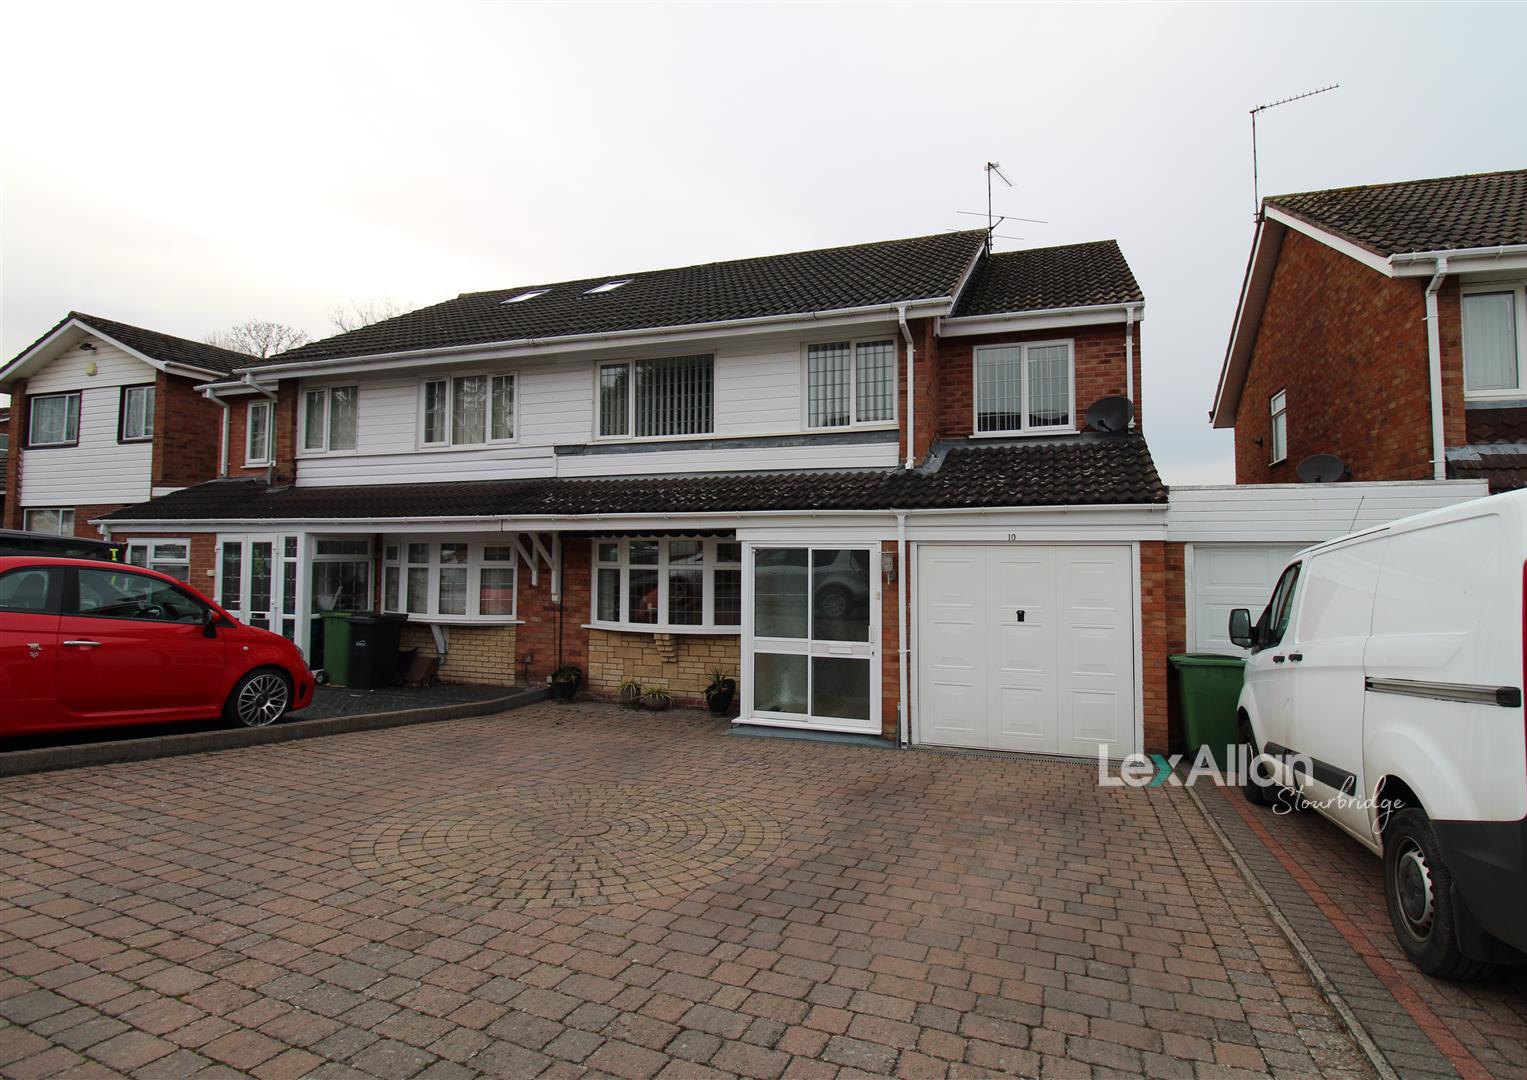 4 bed  for sale in Radley Road, Stourbridge, DY9 